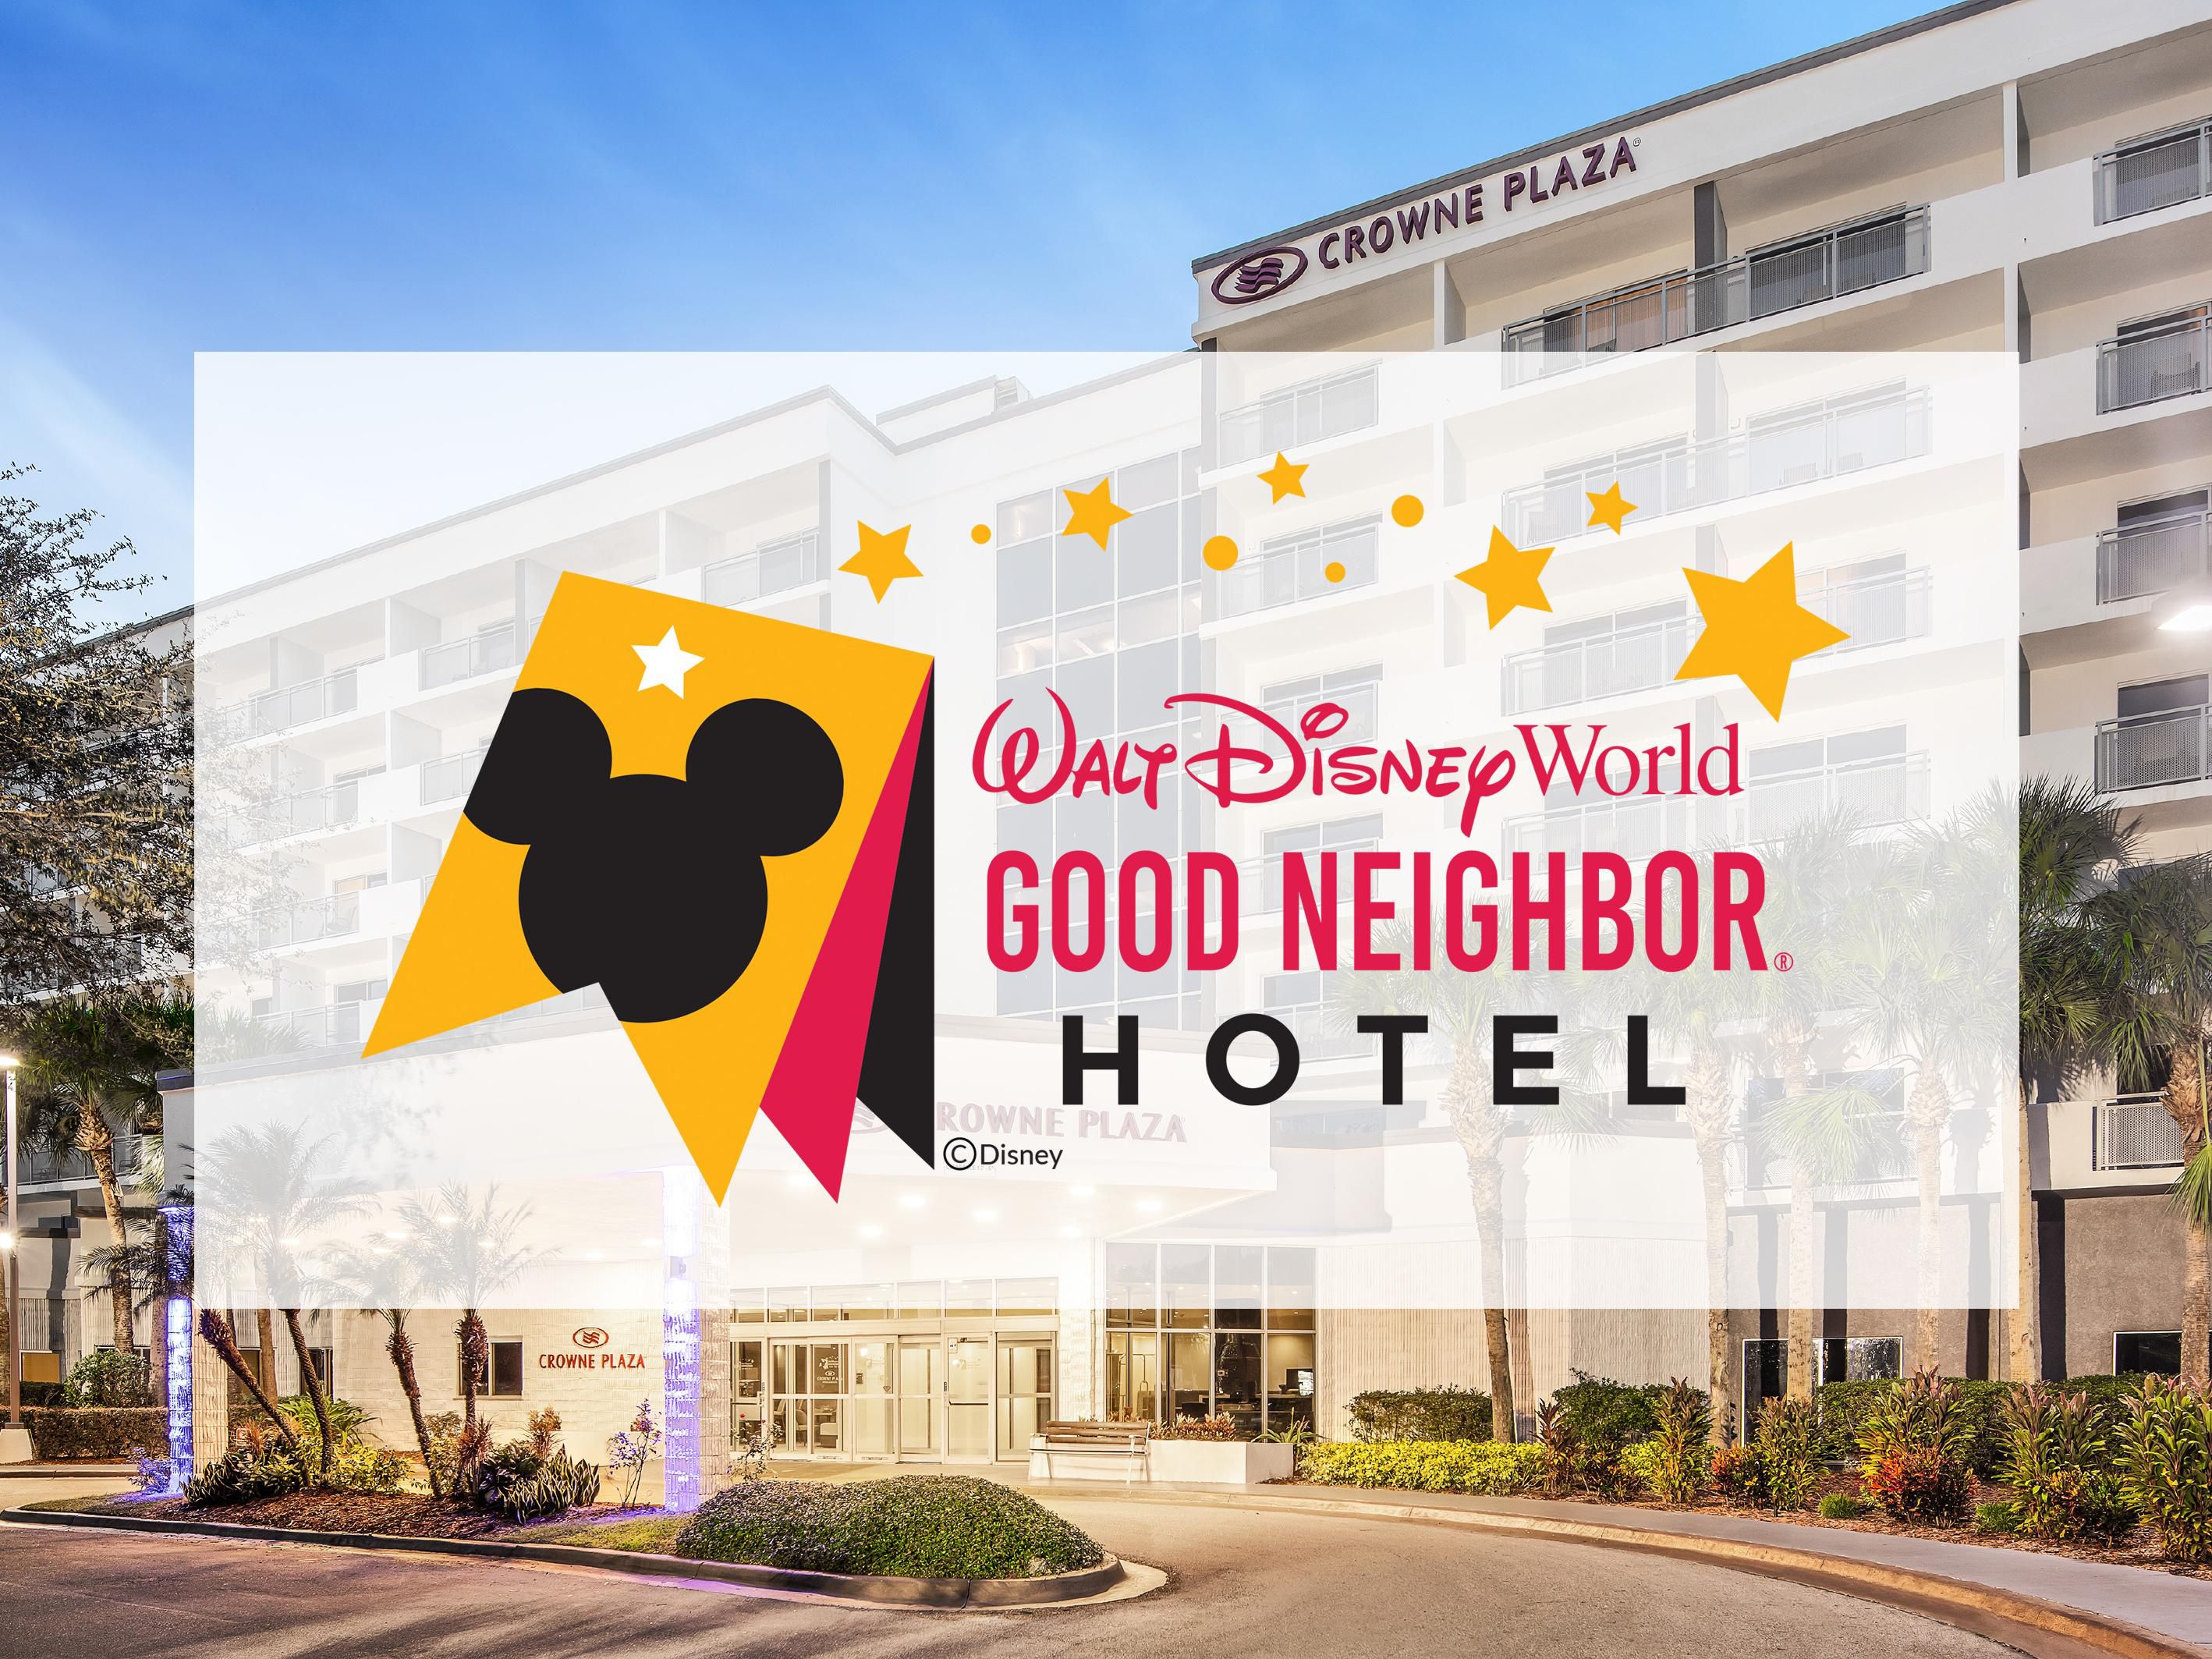 Located less than a mile from Walt Disney World Resort®, our family-friendly hotel is your ideal retreat between theme park adventures. As a Disney Good Neighbor® Hotel, we provide a free shuttle to Disney parks and ensure comfort and authentic family experiences during your stay.